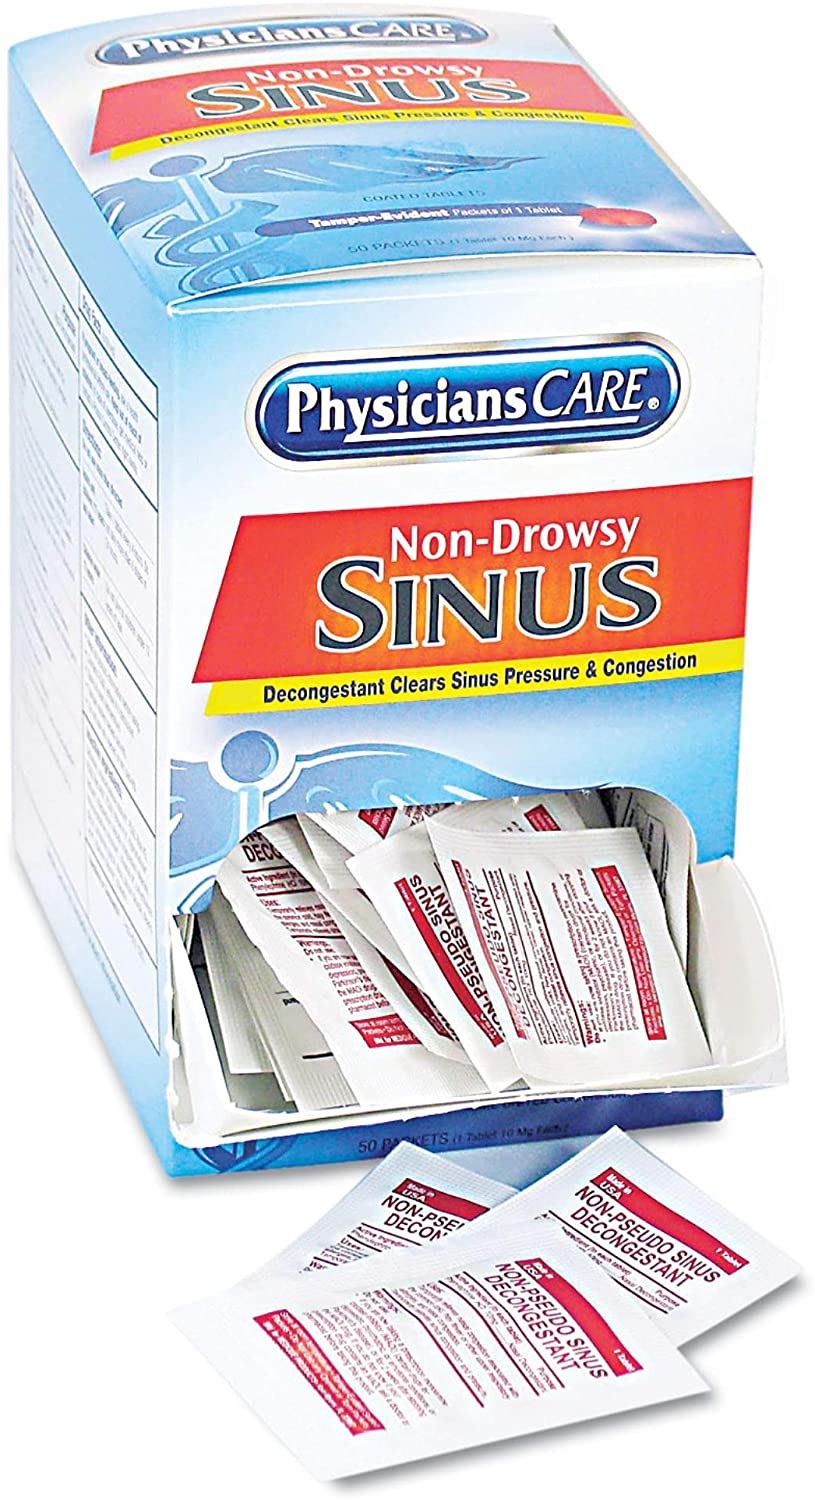 90087-005 First Aid Only PhysiciansCare Non-Drowsy Sinus Decongestant Medication, 50 Count - Sold per Box